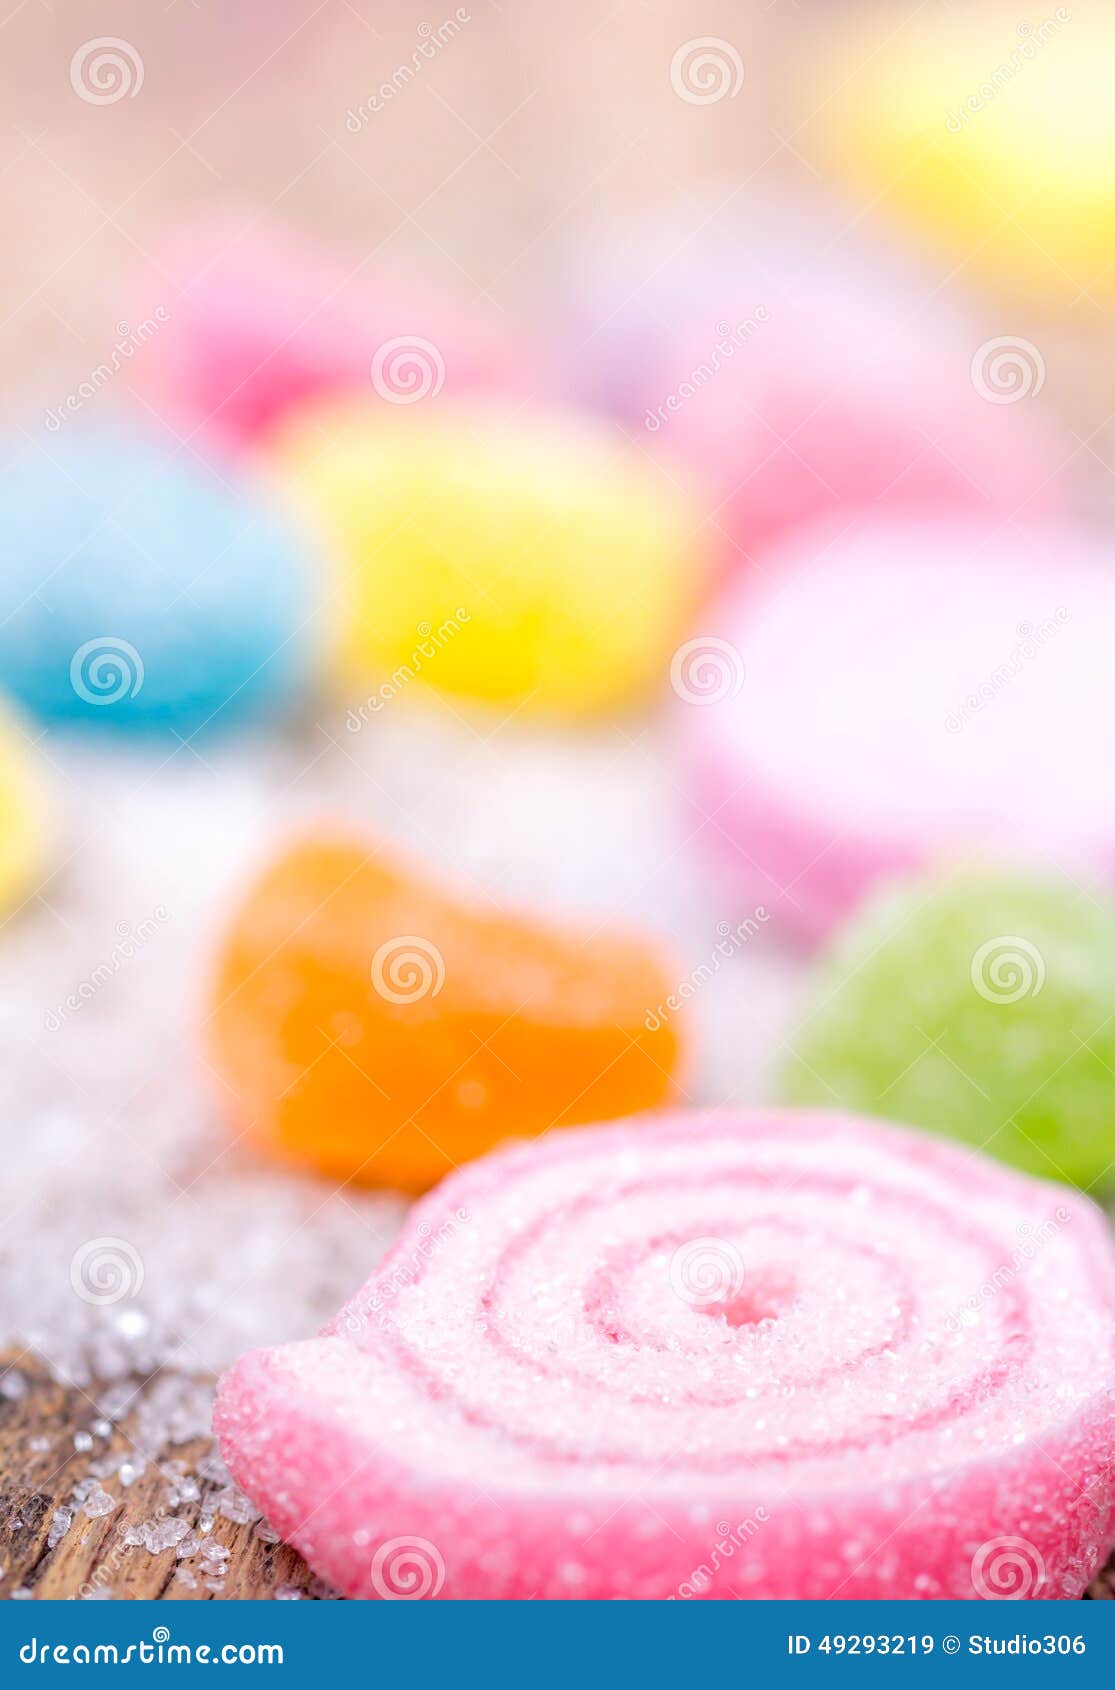 Jelly candies stock image. Image of confectionery, snack - 49293219